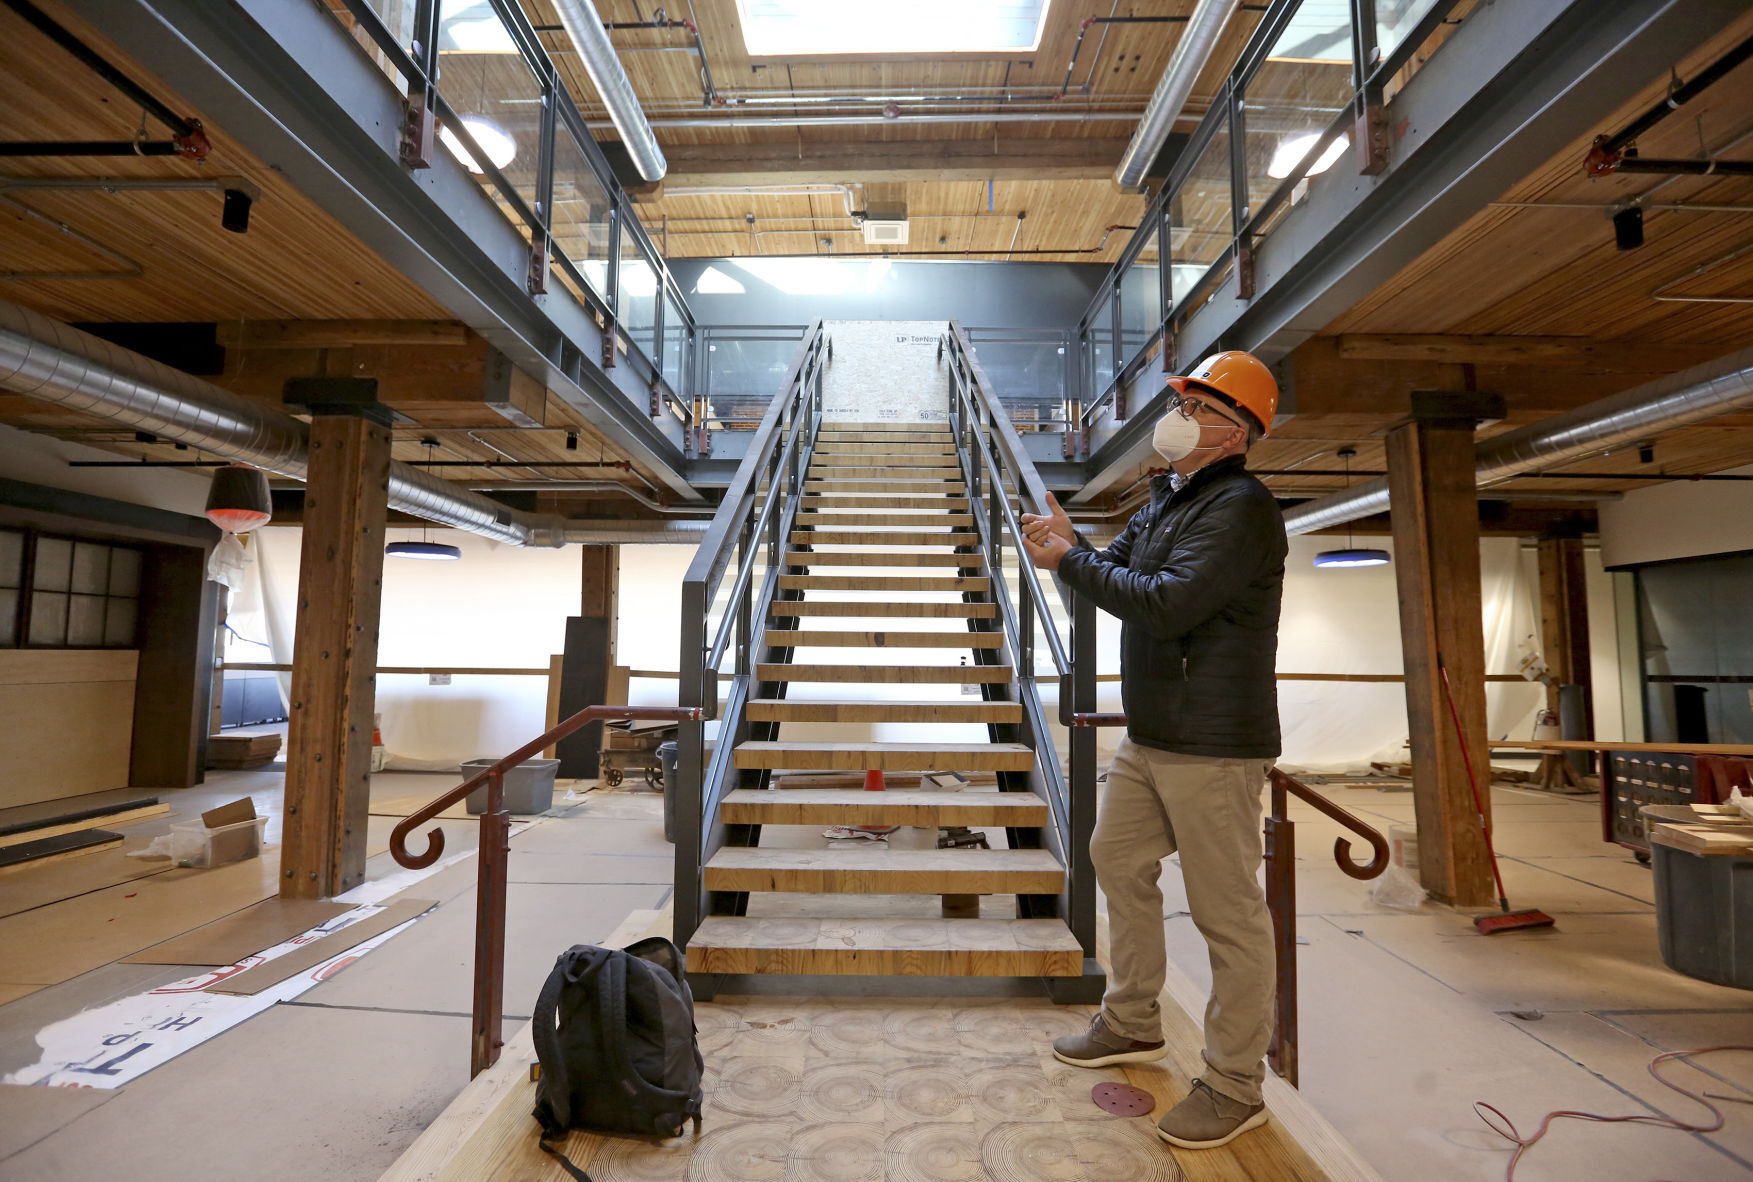 David Klavitter, Dupaco Community Credit Union’s chief marketing officer, shows off new office space at the Dupaco Voices building in Dubuque’s Millwork District. Dupaco has made a $37 million investment in renovating the structure. PHOTO CREDIT: JESSICA REILLY